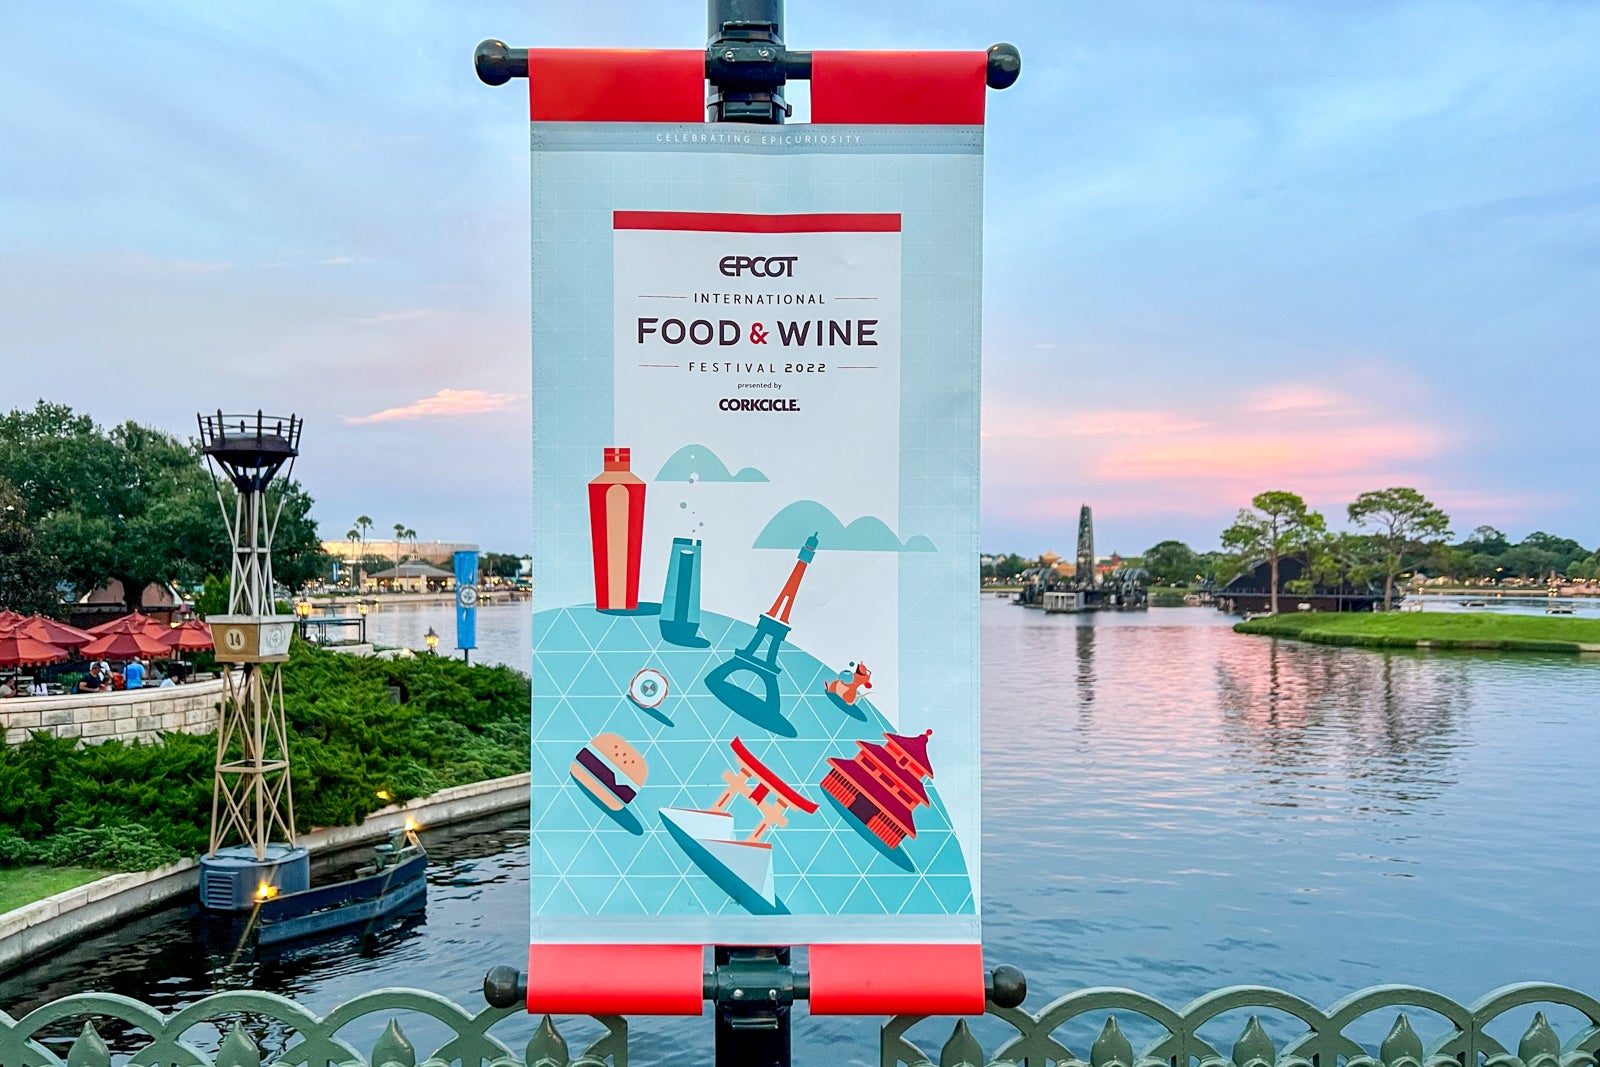 Epcot Food and Wine festival banner at Epcot